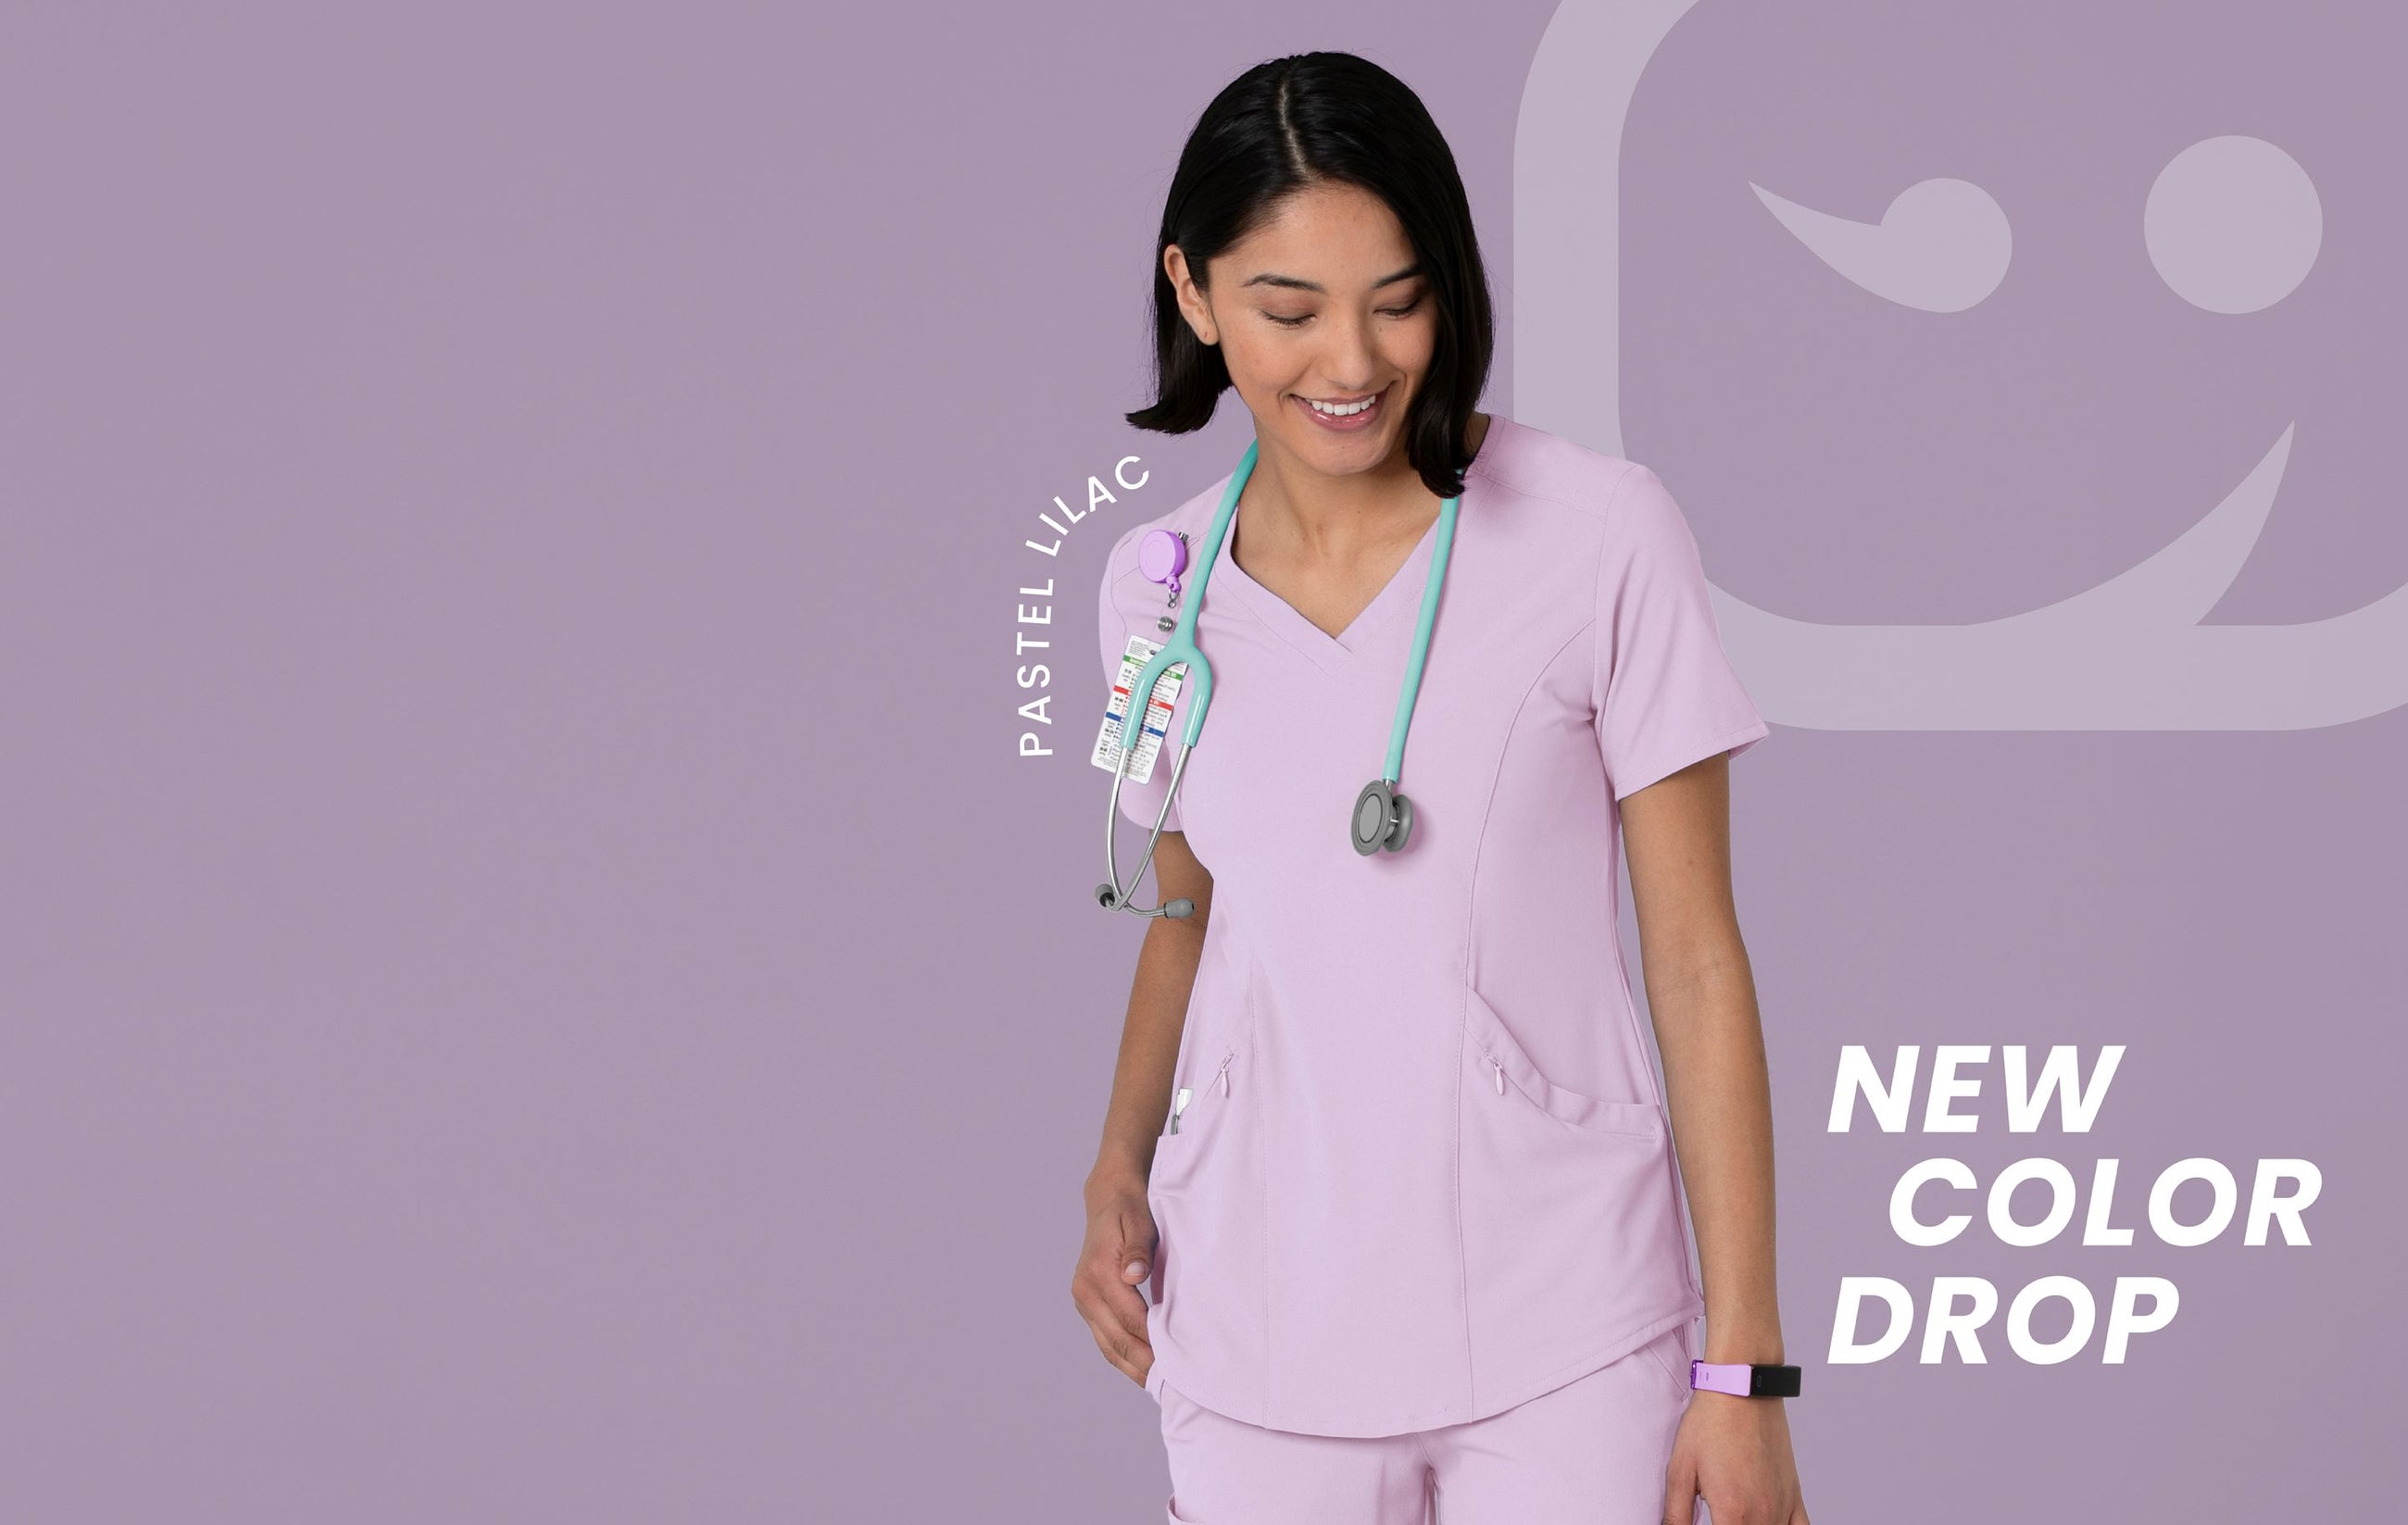 "Pastel Lilac NEW COLOR DROP" Woman in Purple scrubs